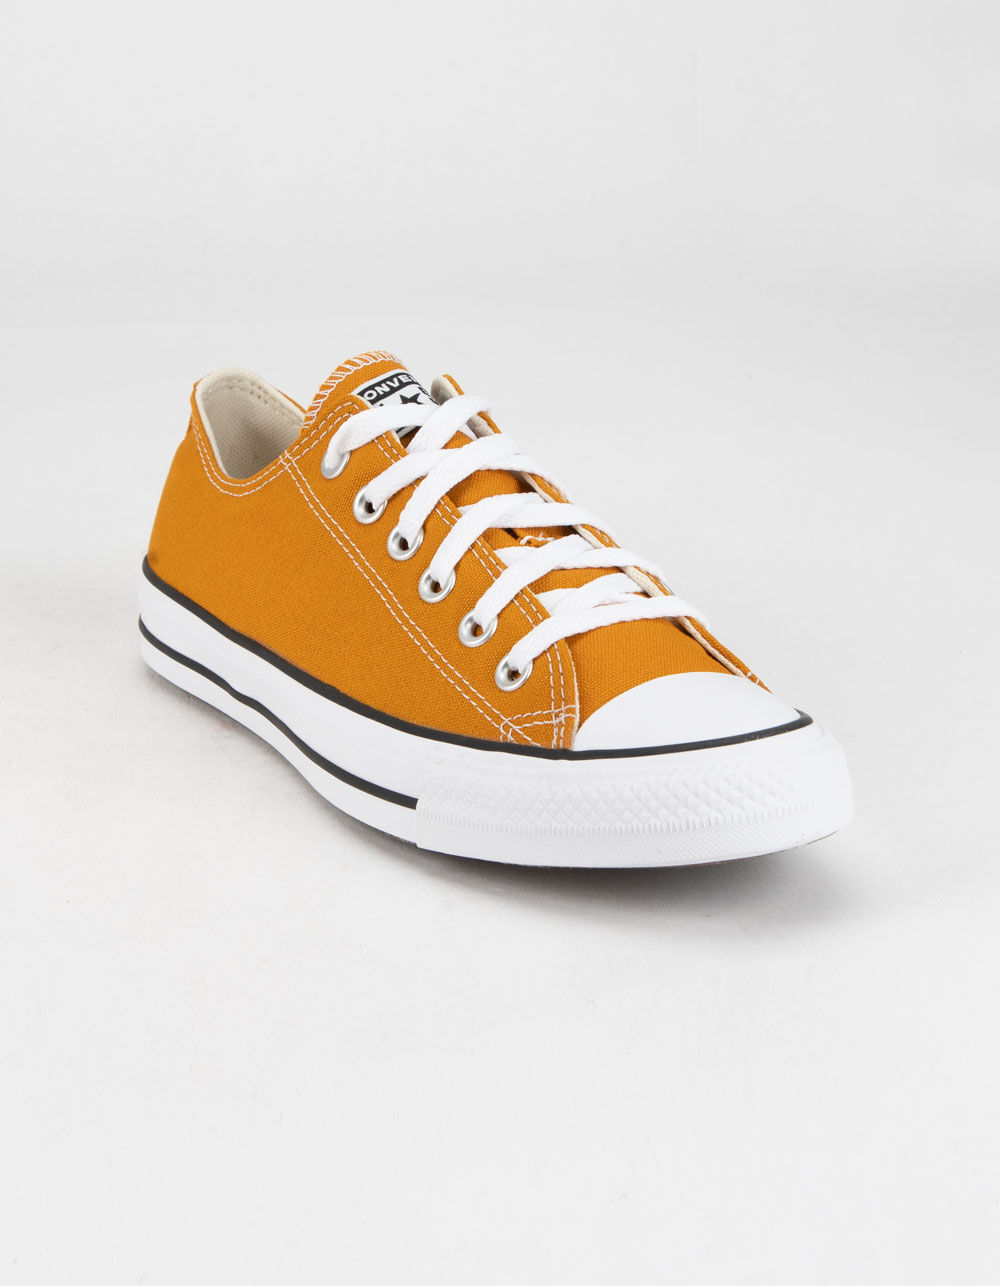 CONVERSE Chuck Taylor All Star OX Womens Saffron Yellow Low Top Shoes ...